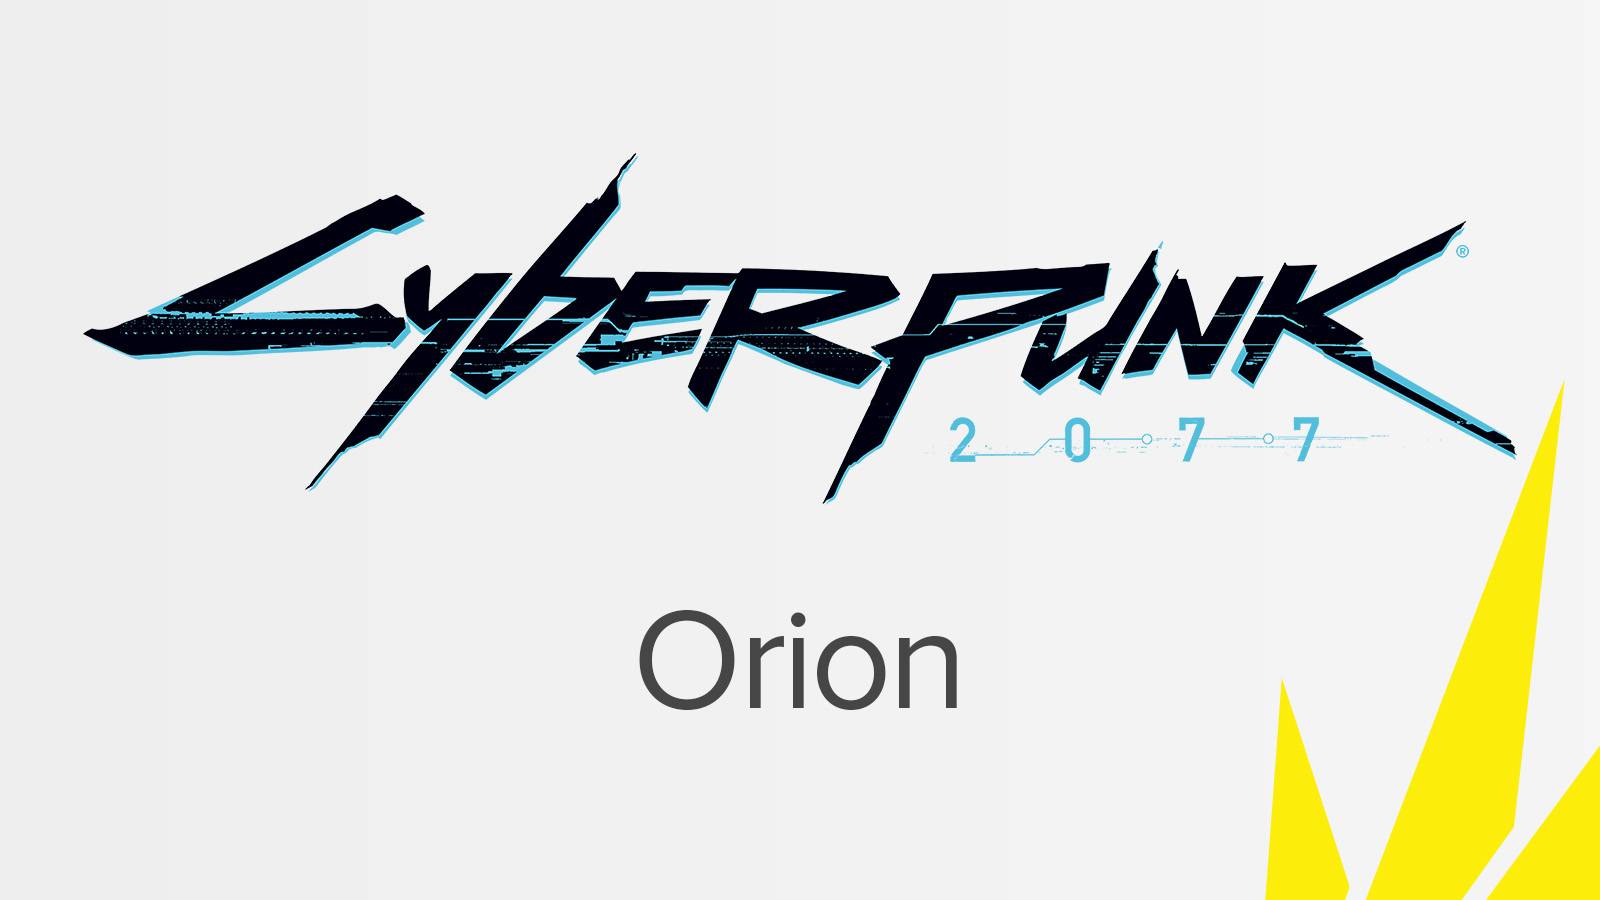 cyberpunk 2077 Orion announced by CD Project Red